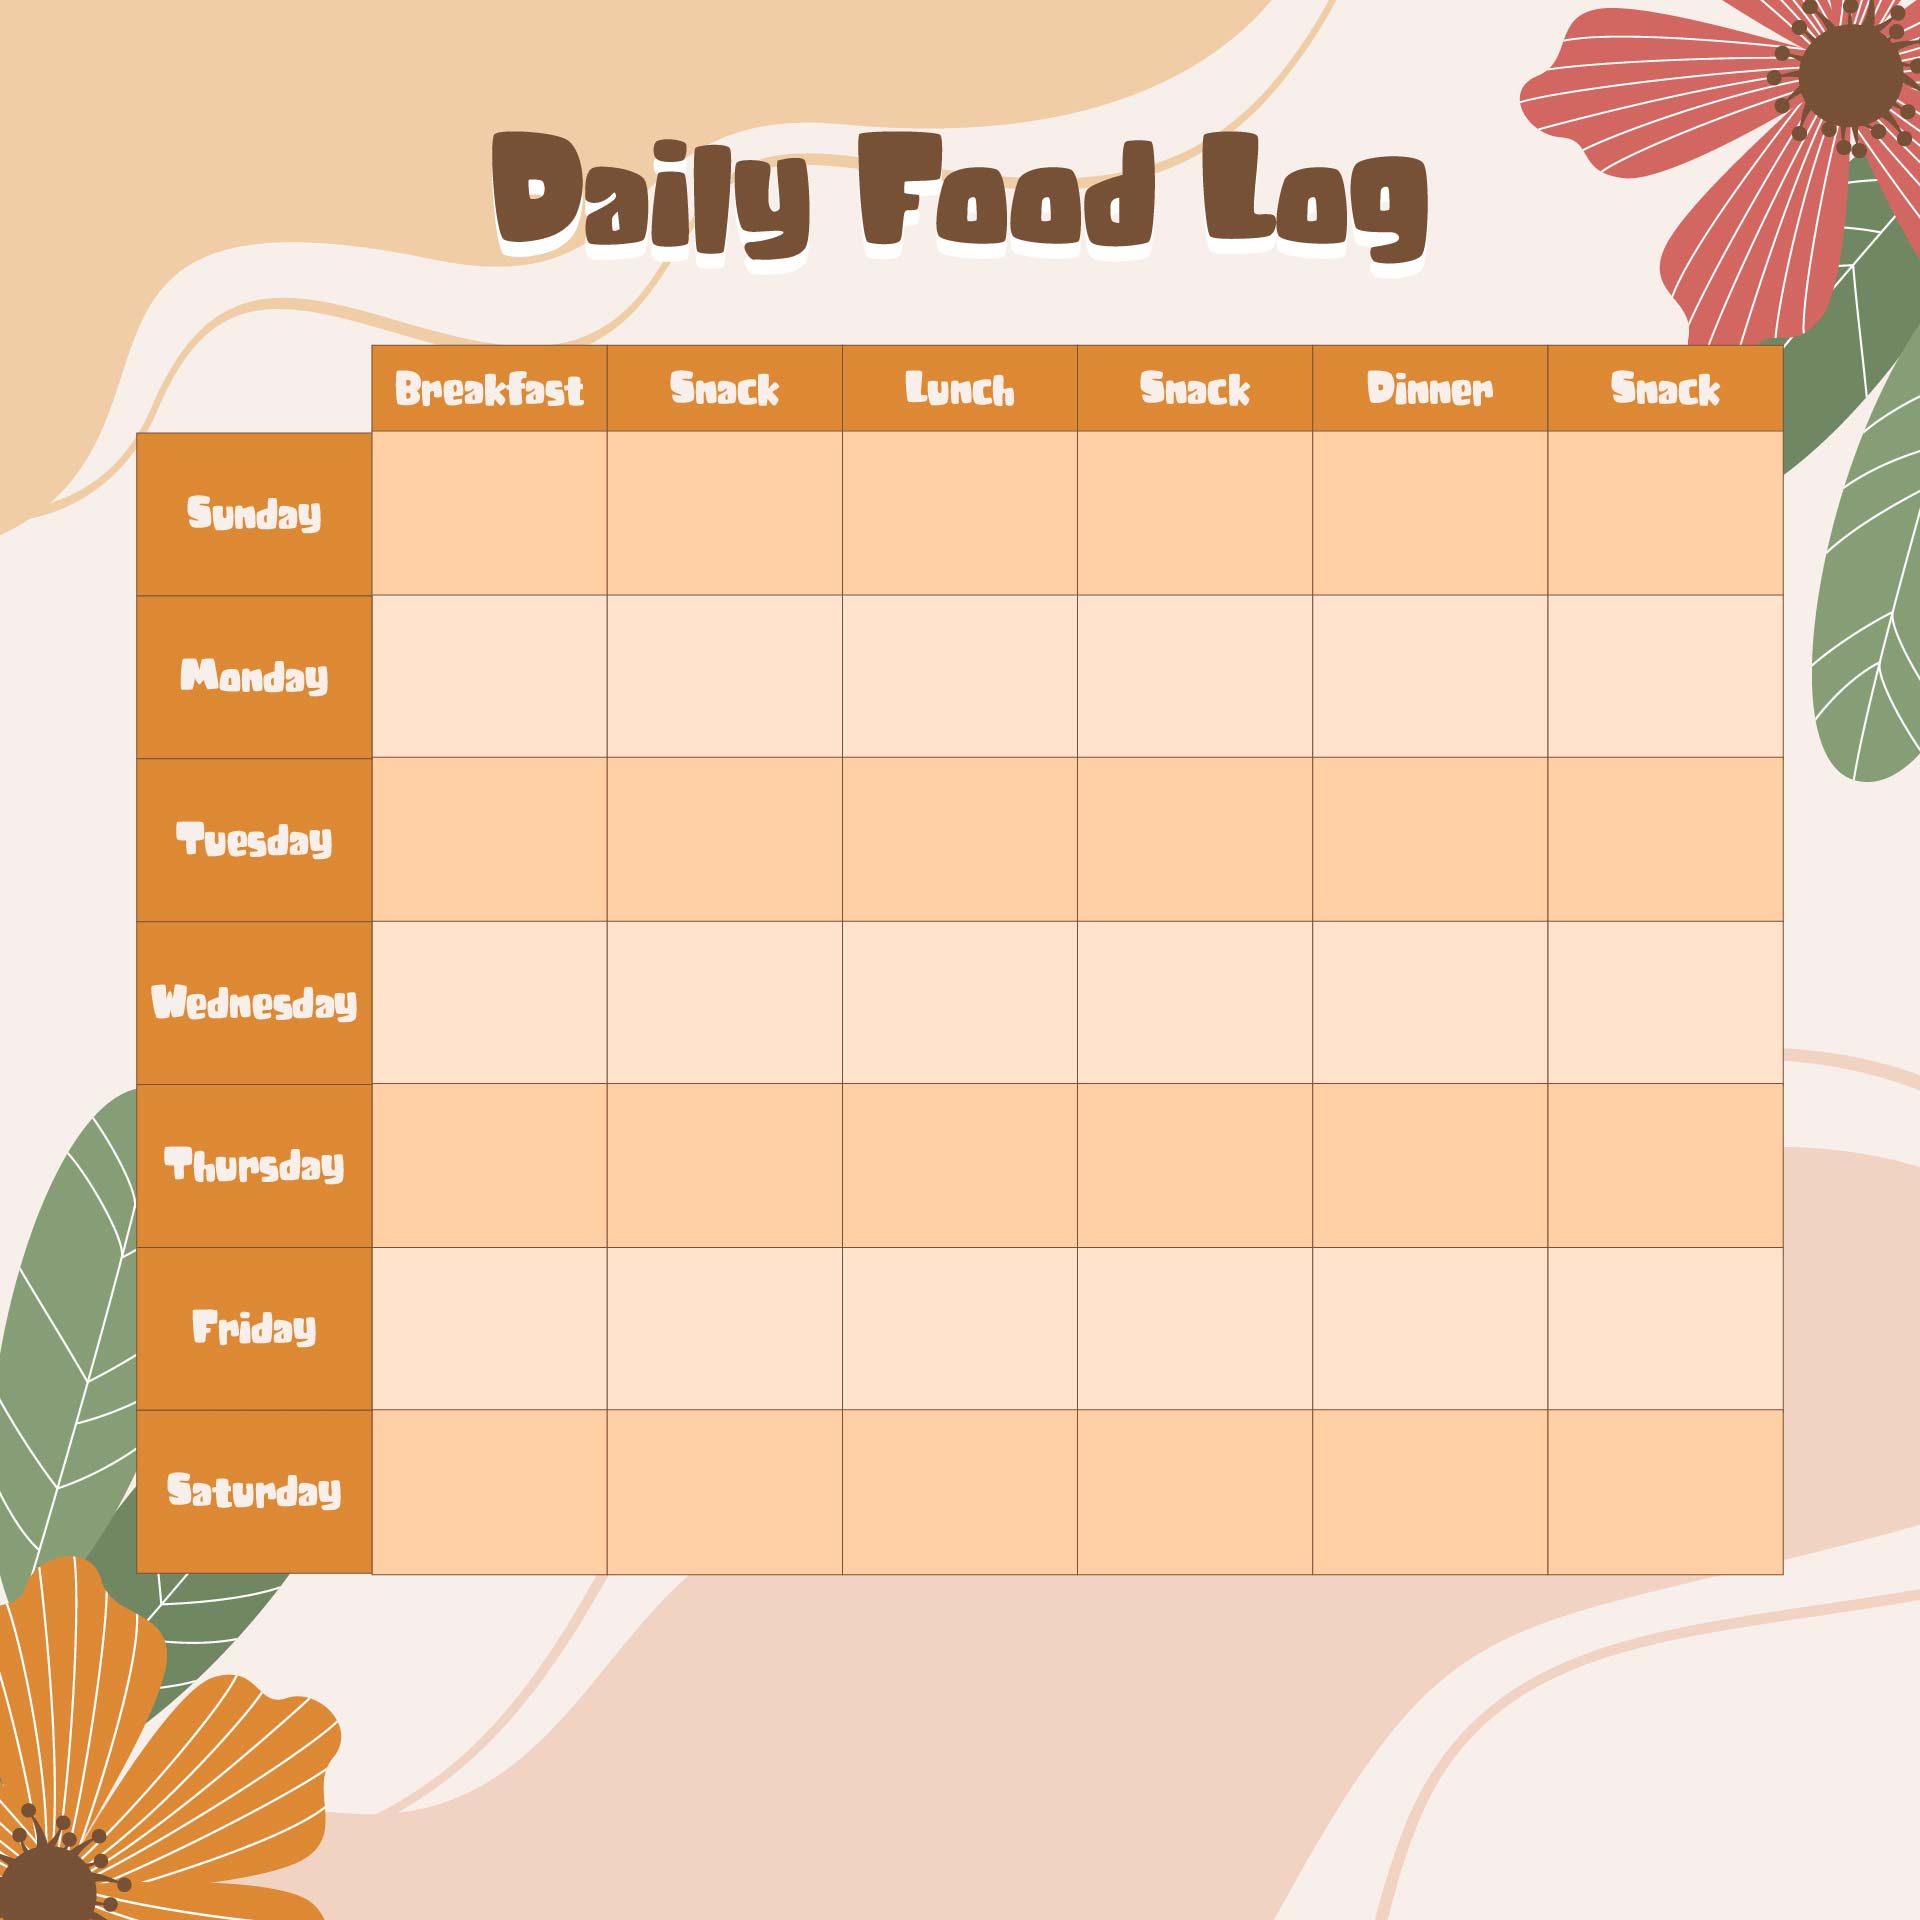 Daily Food Log Example With Calories